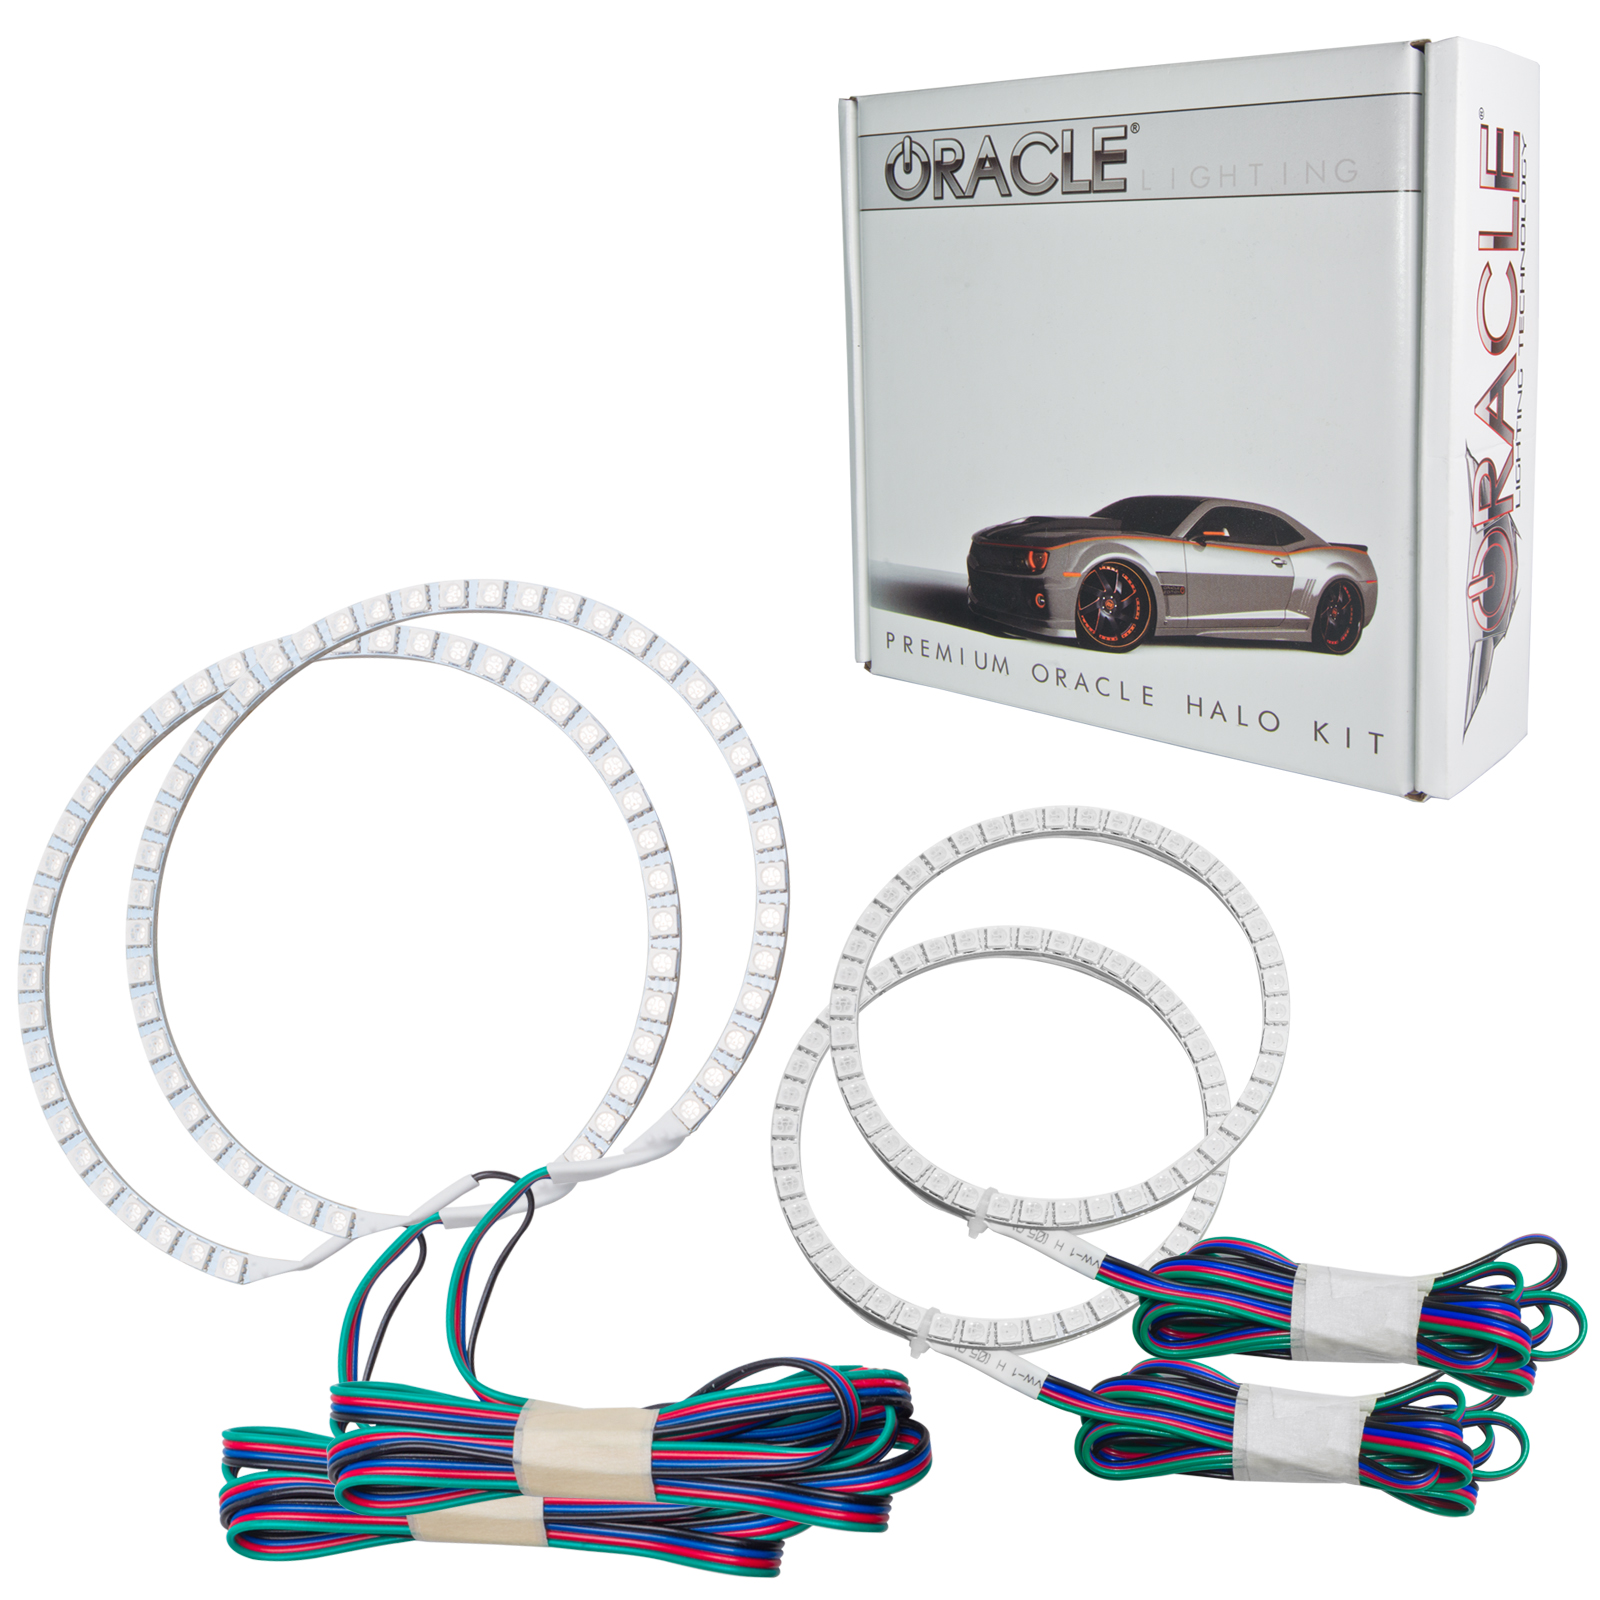 Show details for Oracle Lighting 3945-333 Colorshift Halo Kit, Colorshift 2.0